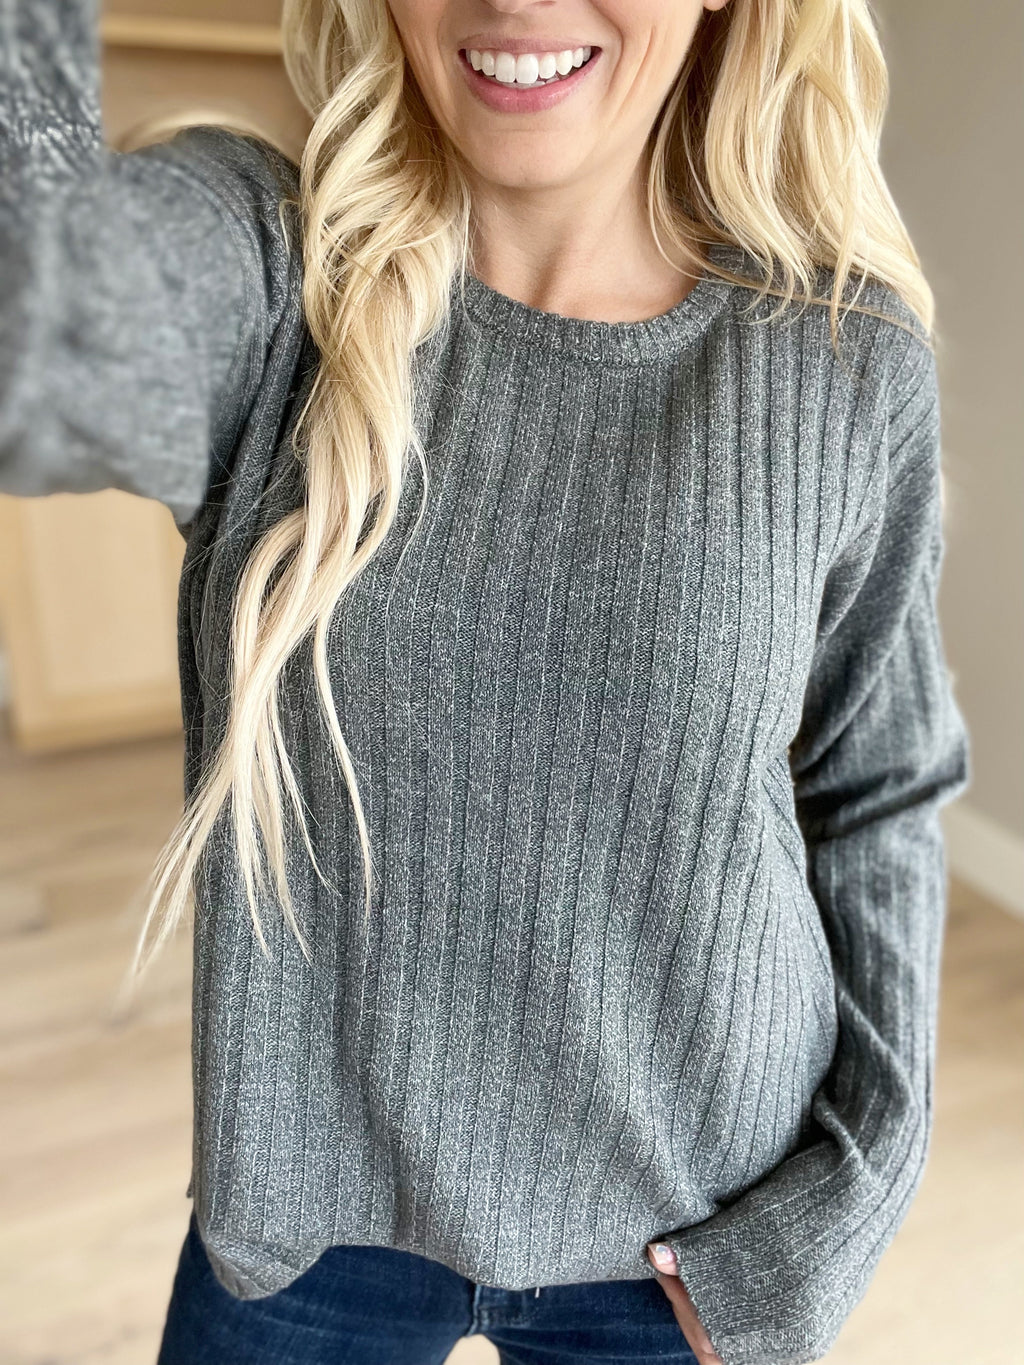 Crazy For You Sweater in Charcoal